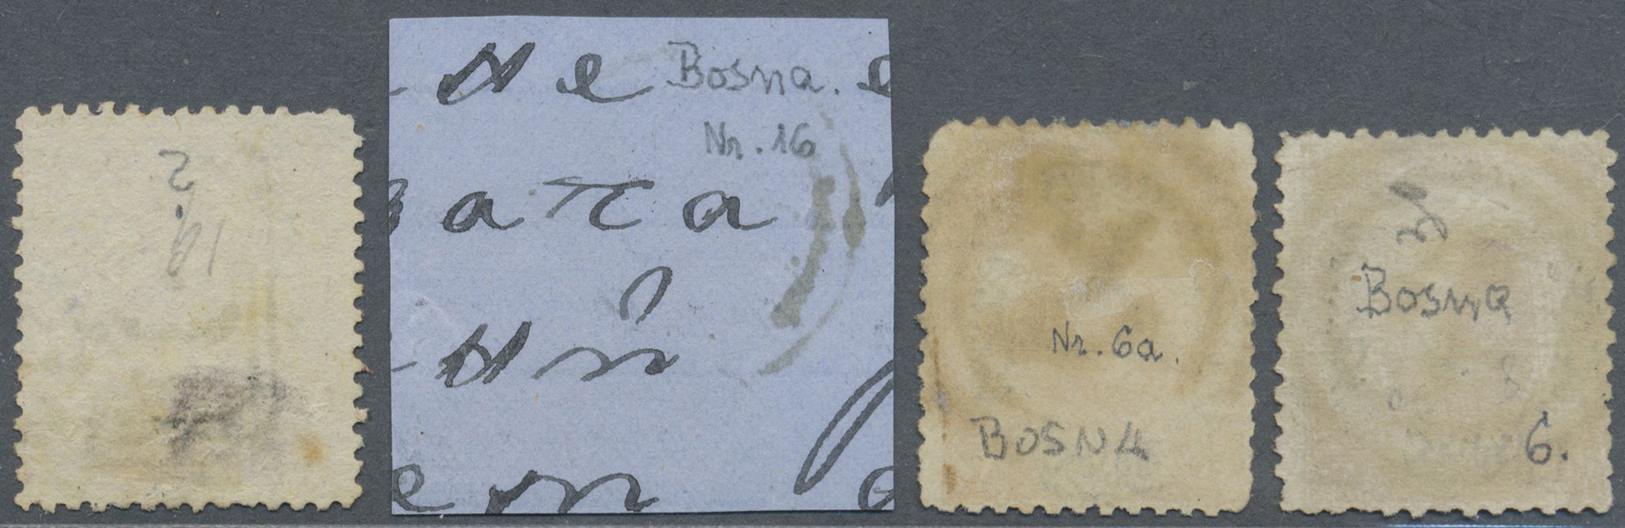 Brrst/O Bosnien Und Herzegowina: 1865-70, "BOSNA 81" On Two 1865 20 Pa. Yellow And Orange, 2 Pia. On Piece And 10 Pa. - Bosnia And Herzegovina